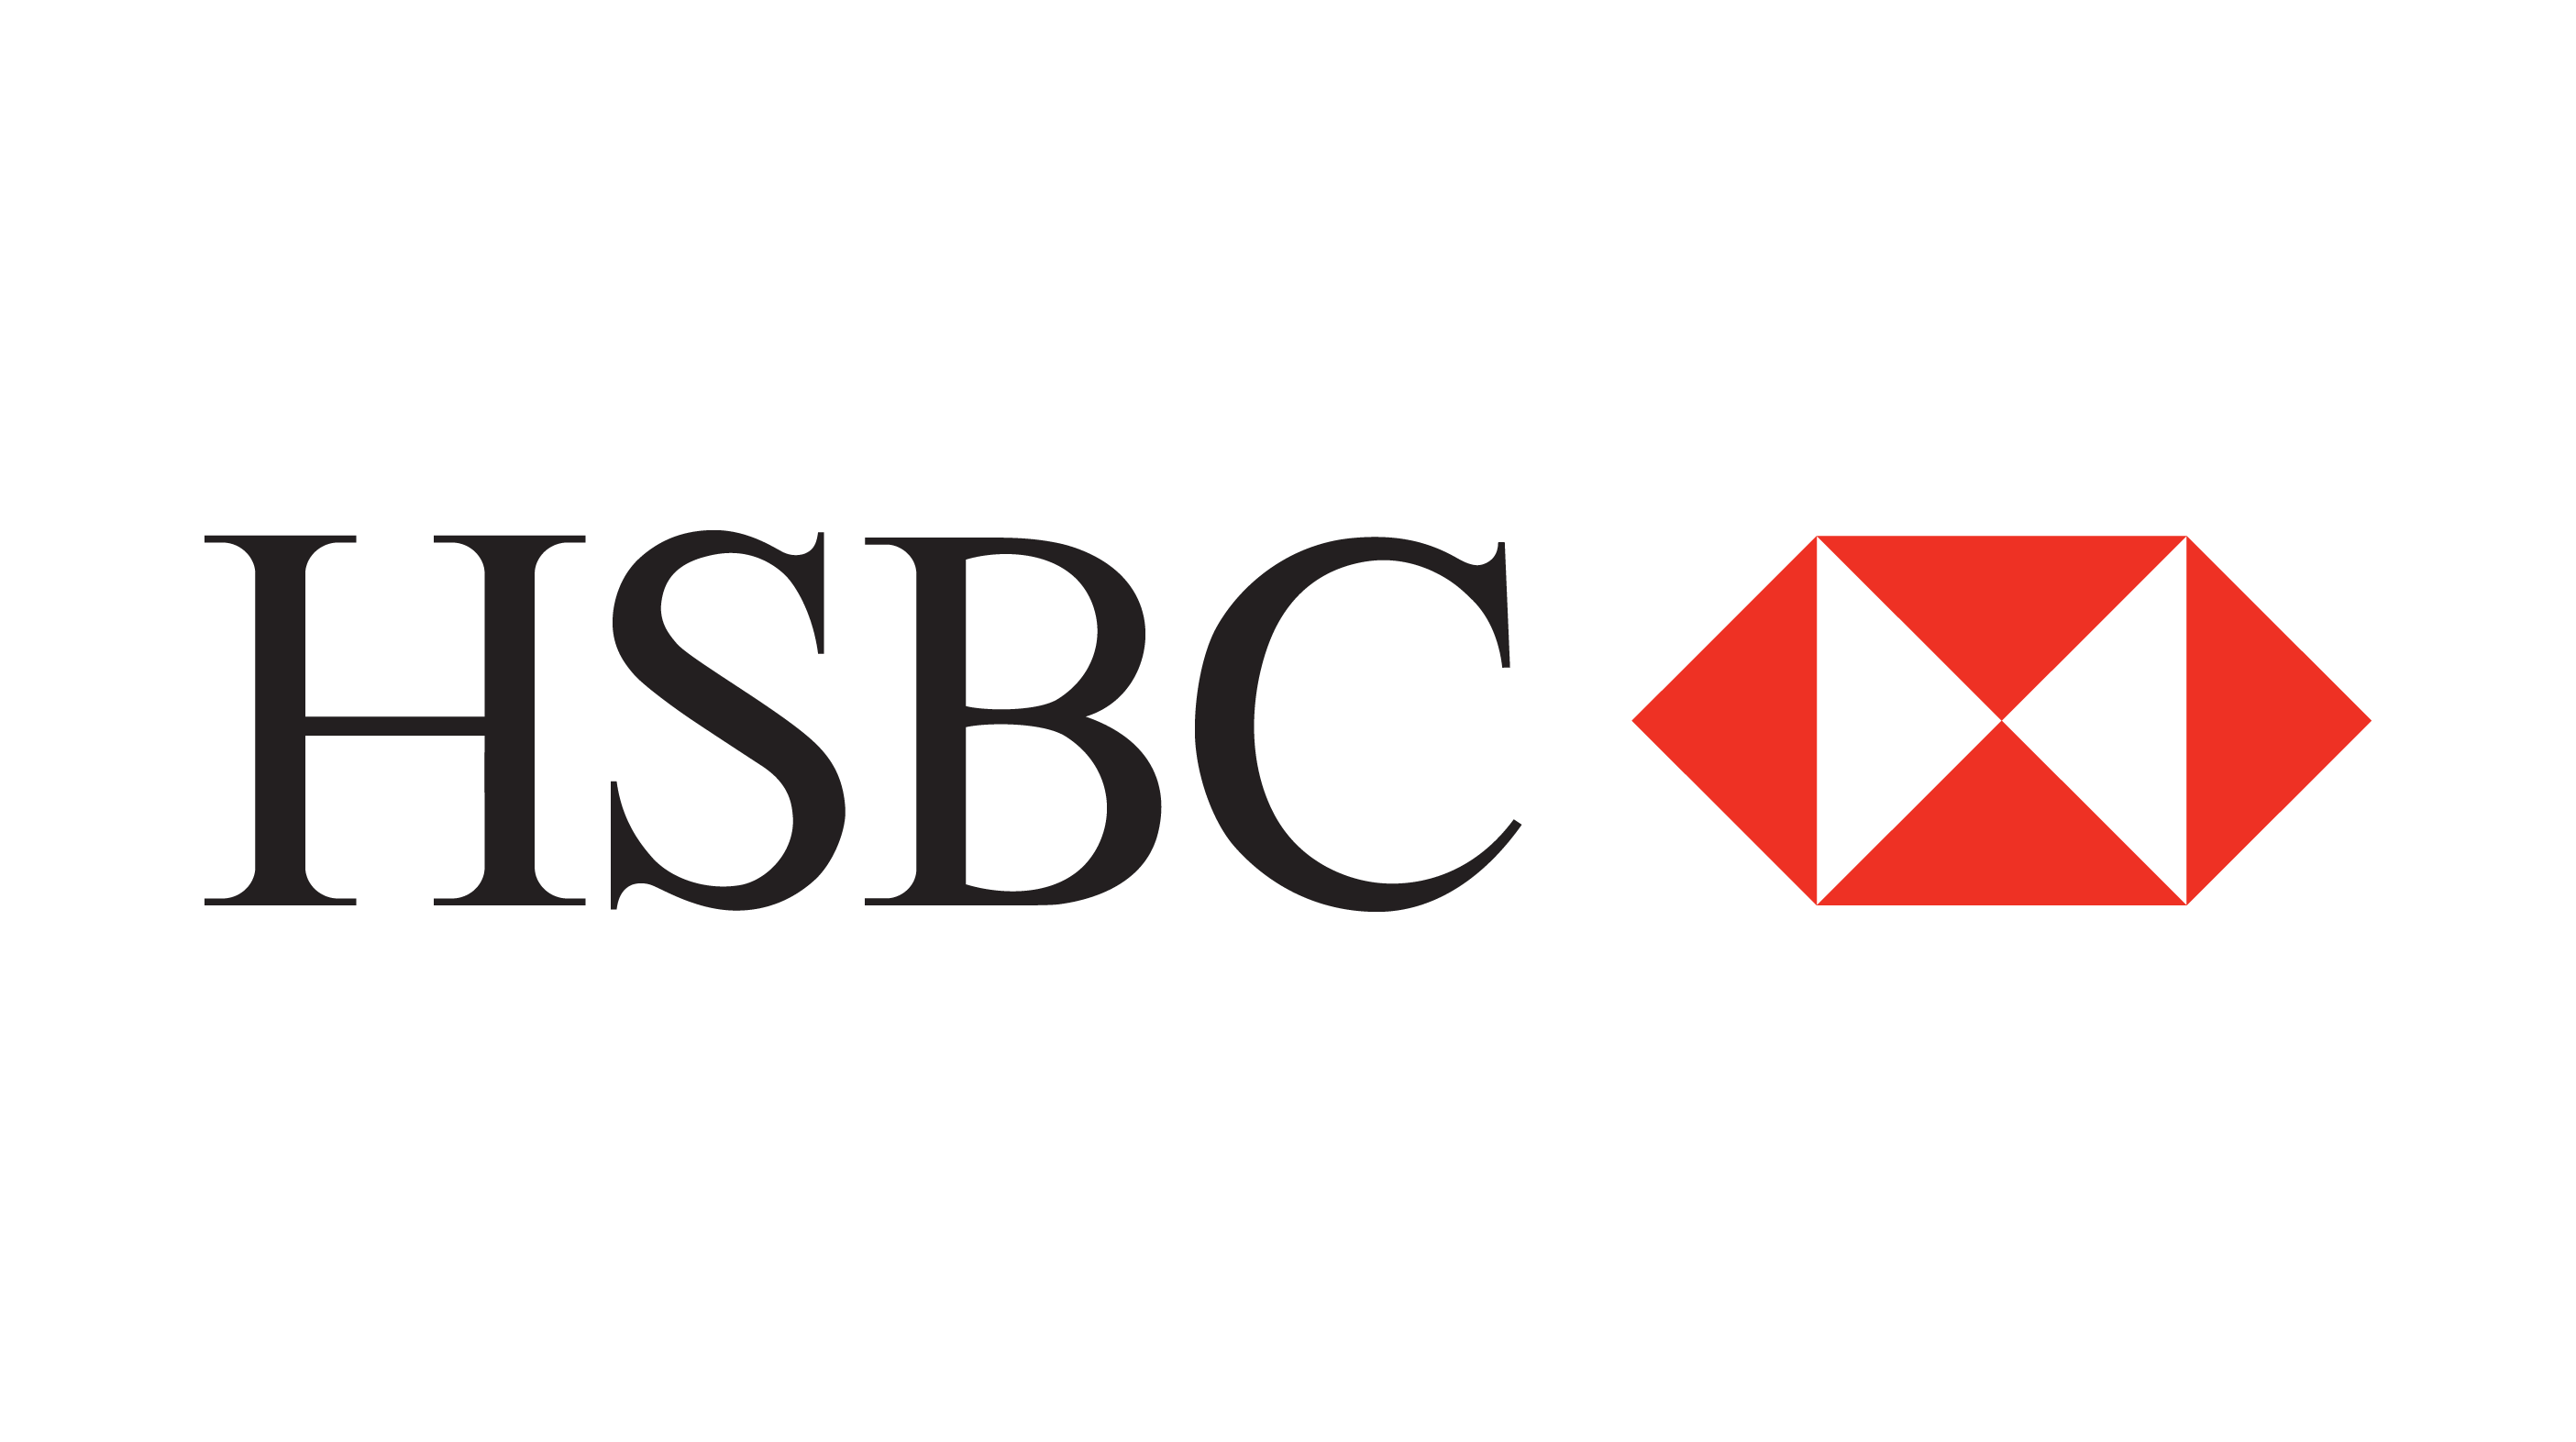 HSBC need your help to improve services for the LGBT+ community